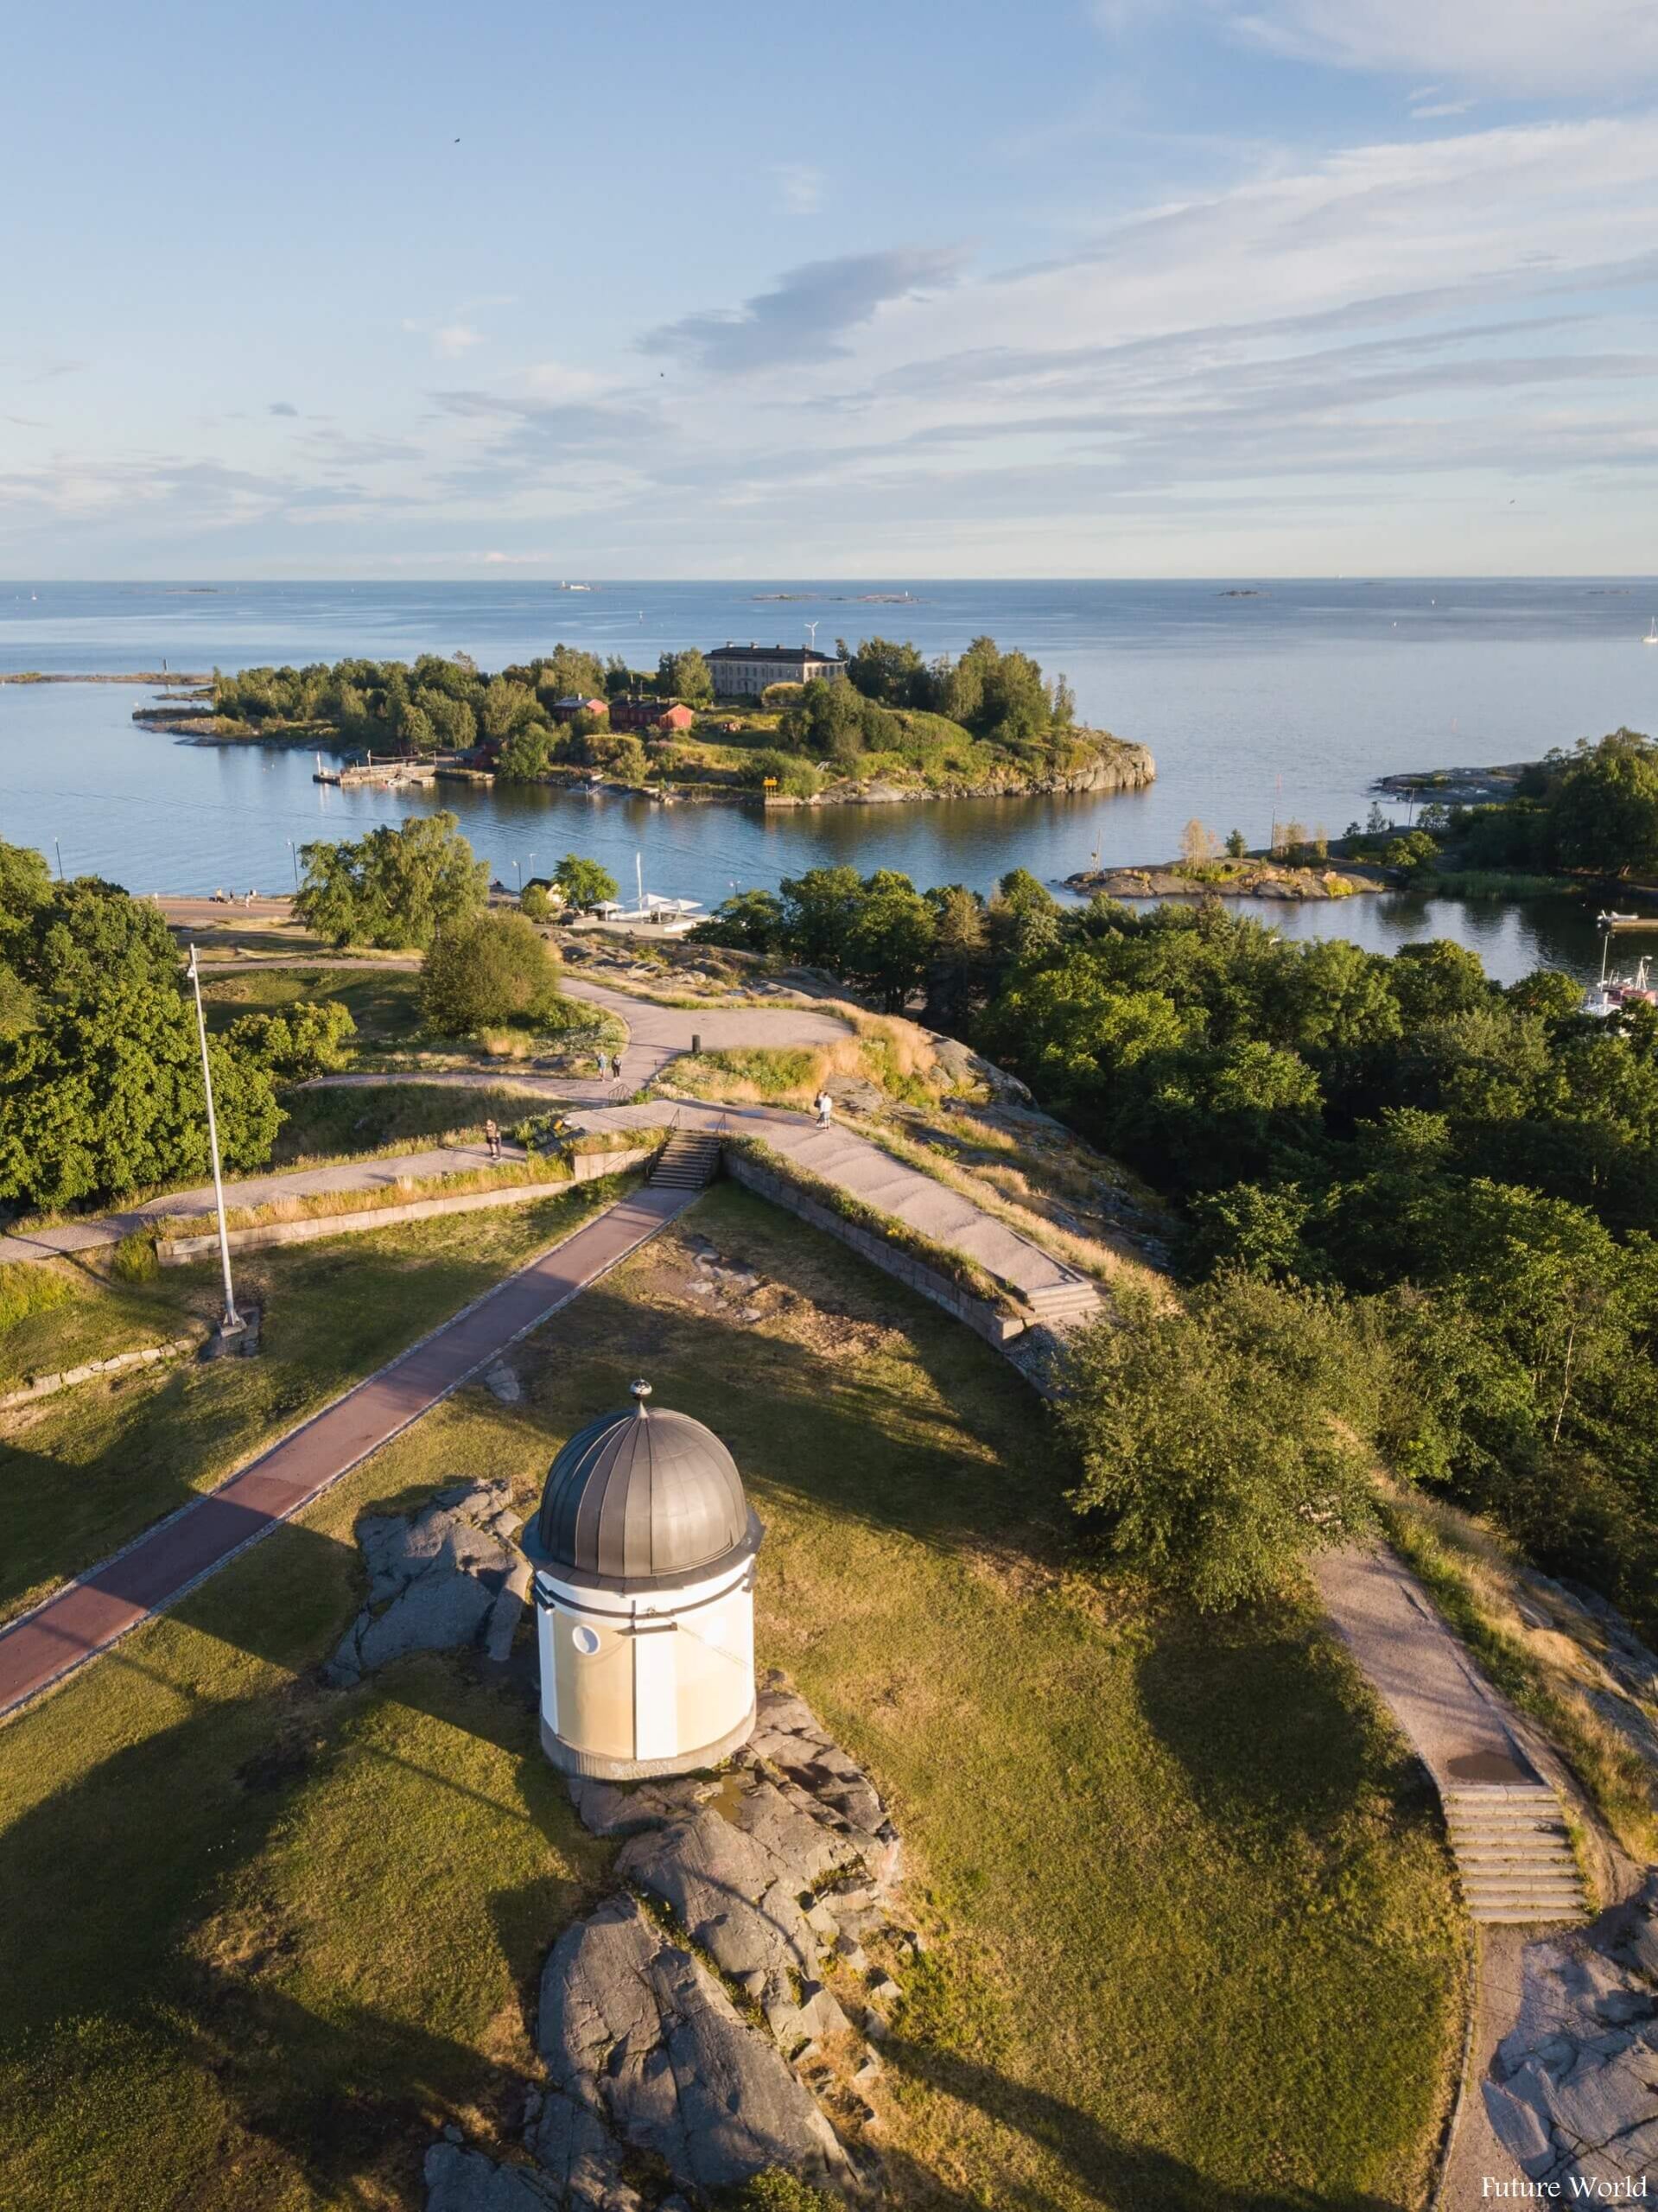 Top Destinations To Visit In Kaivpuisto, Helsinki